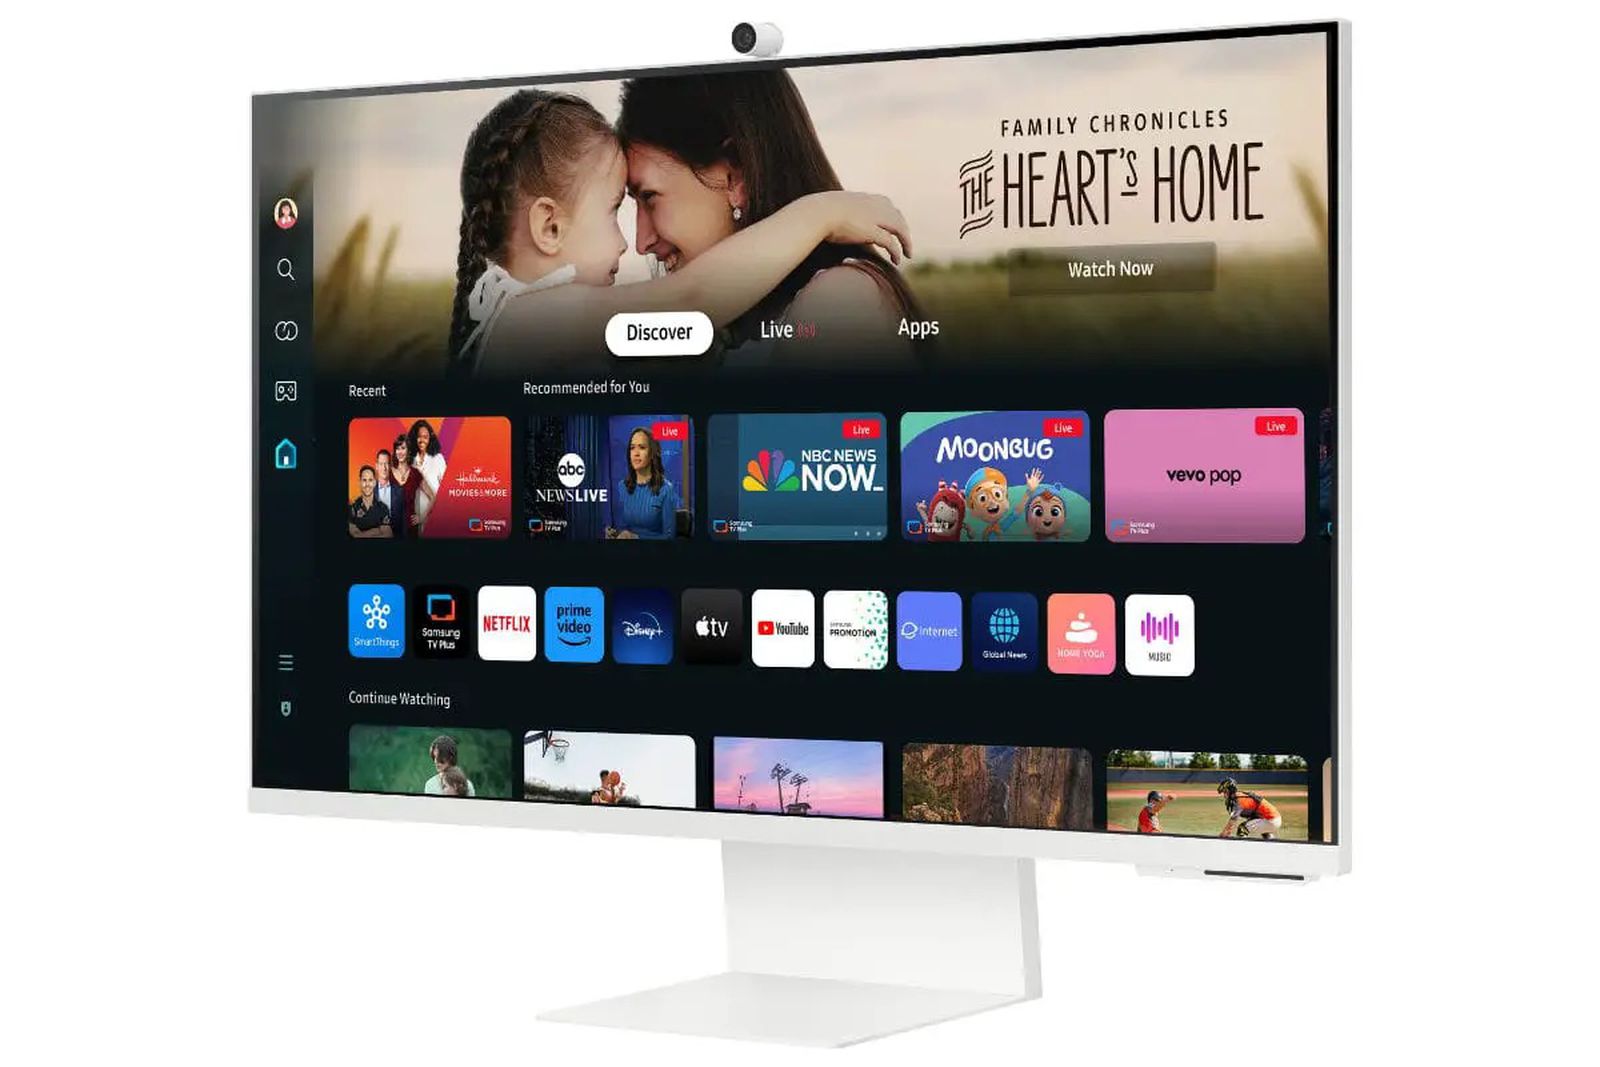 CES 2024: Samsung Unveils Refreshed iMac-Style 32-Inch 4K Smart Monitor -  MacRumors